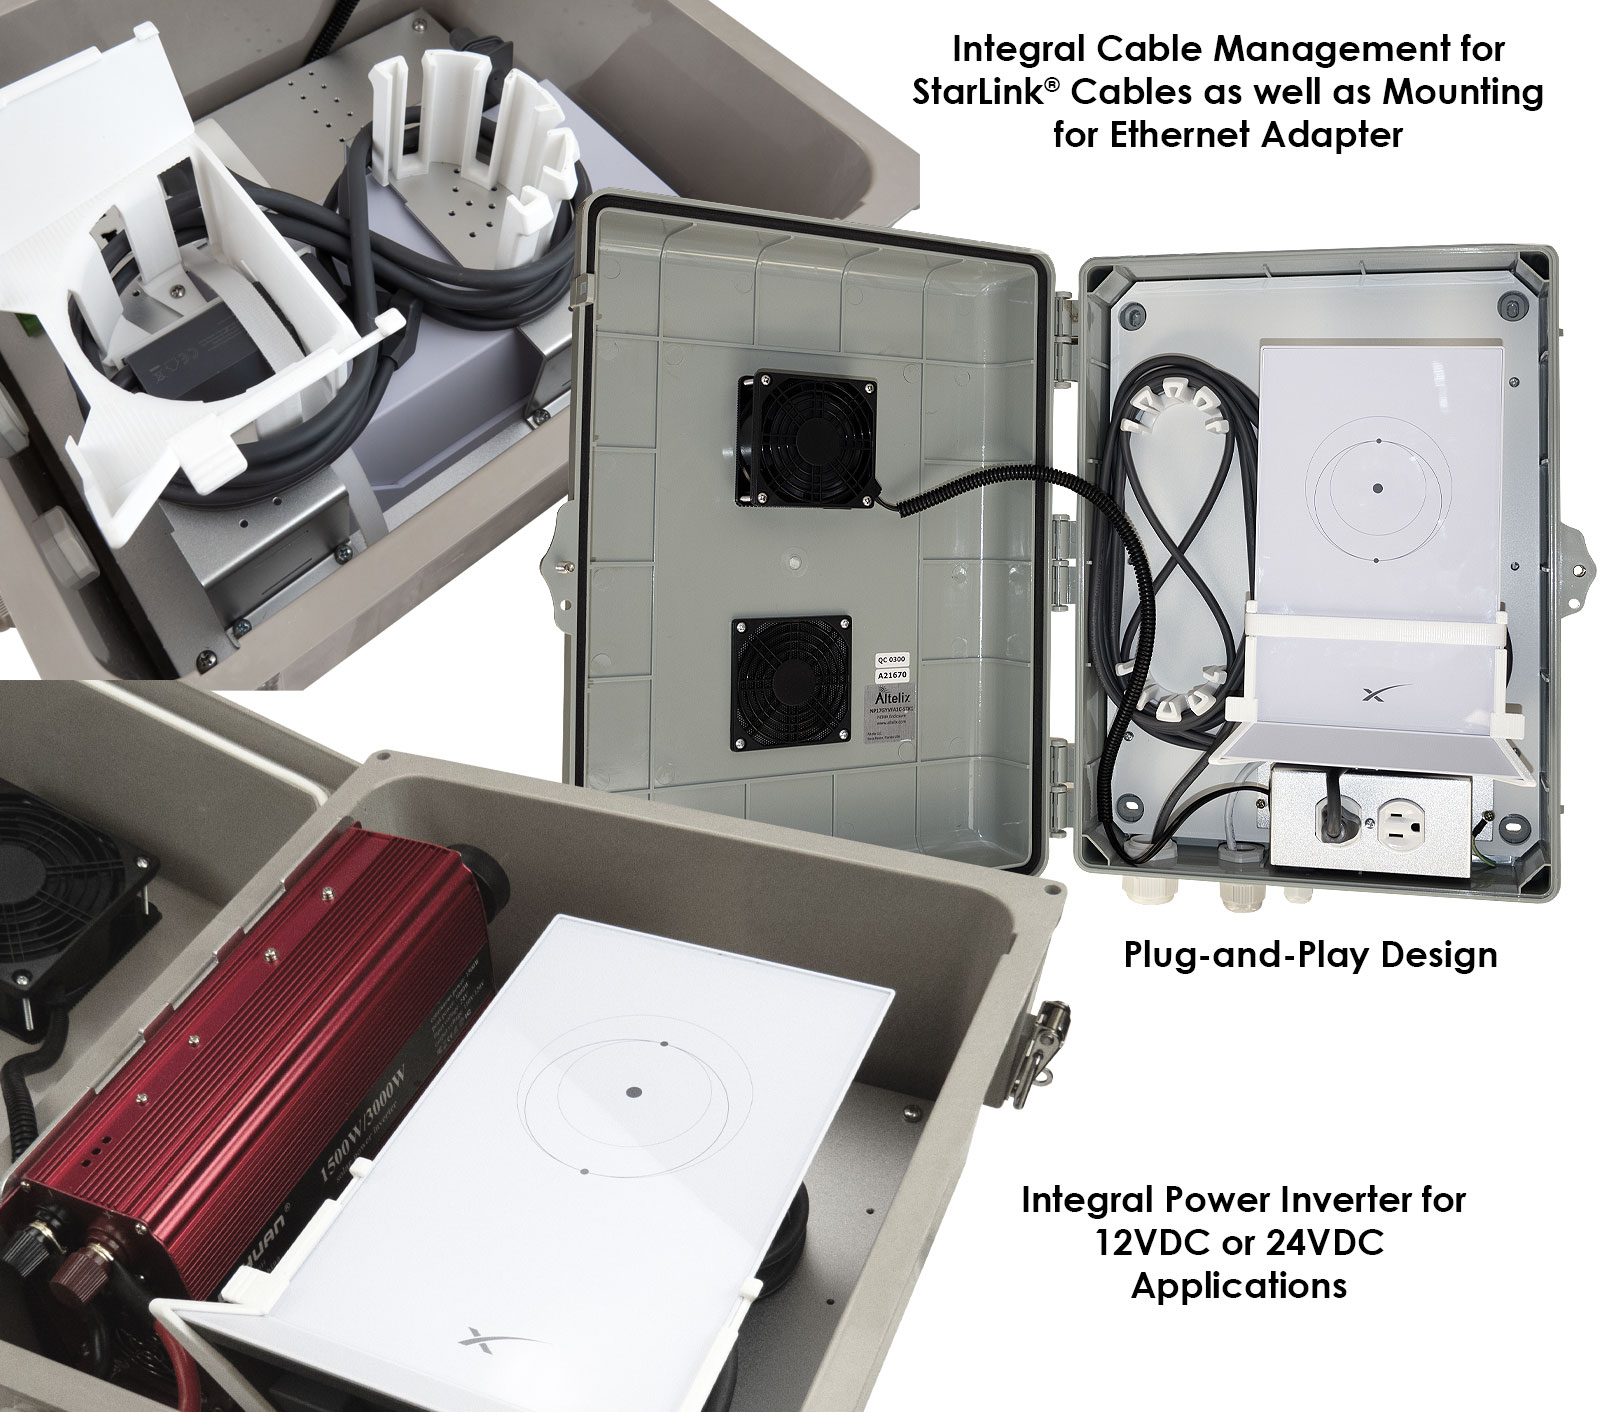 Enclosures for Starlink Satellite Routers